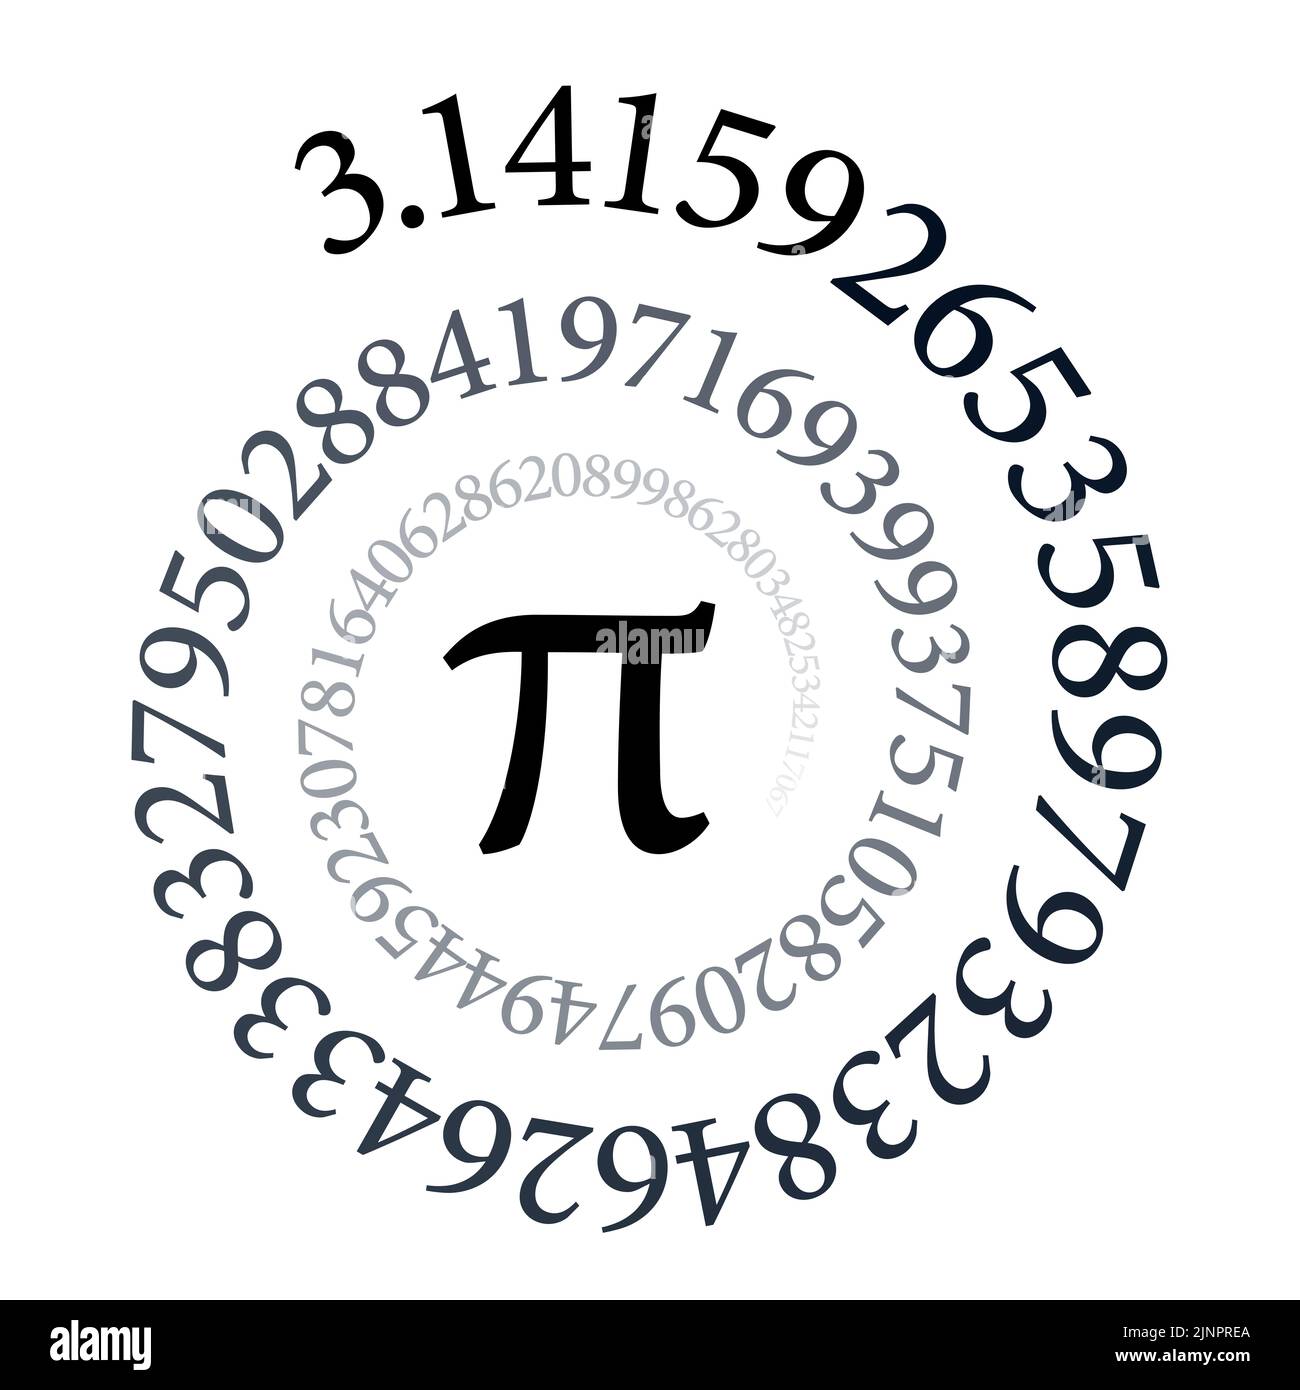 Pi spiral. The first hundred digits of the infinite circle number and mathematical constant Pi, forming an arithmetic spiral. Black and white. Stock Photo